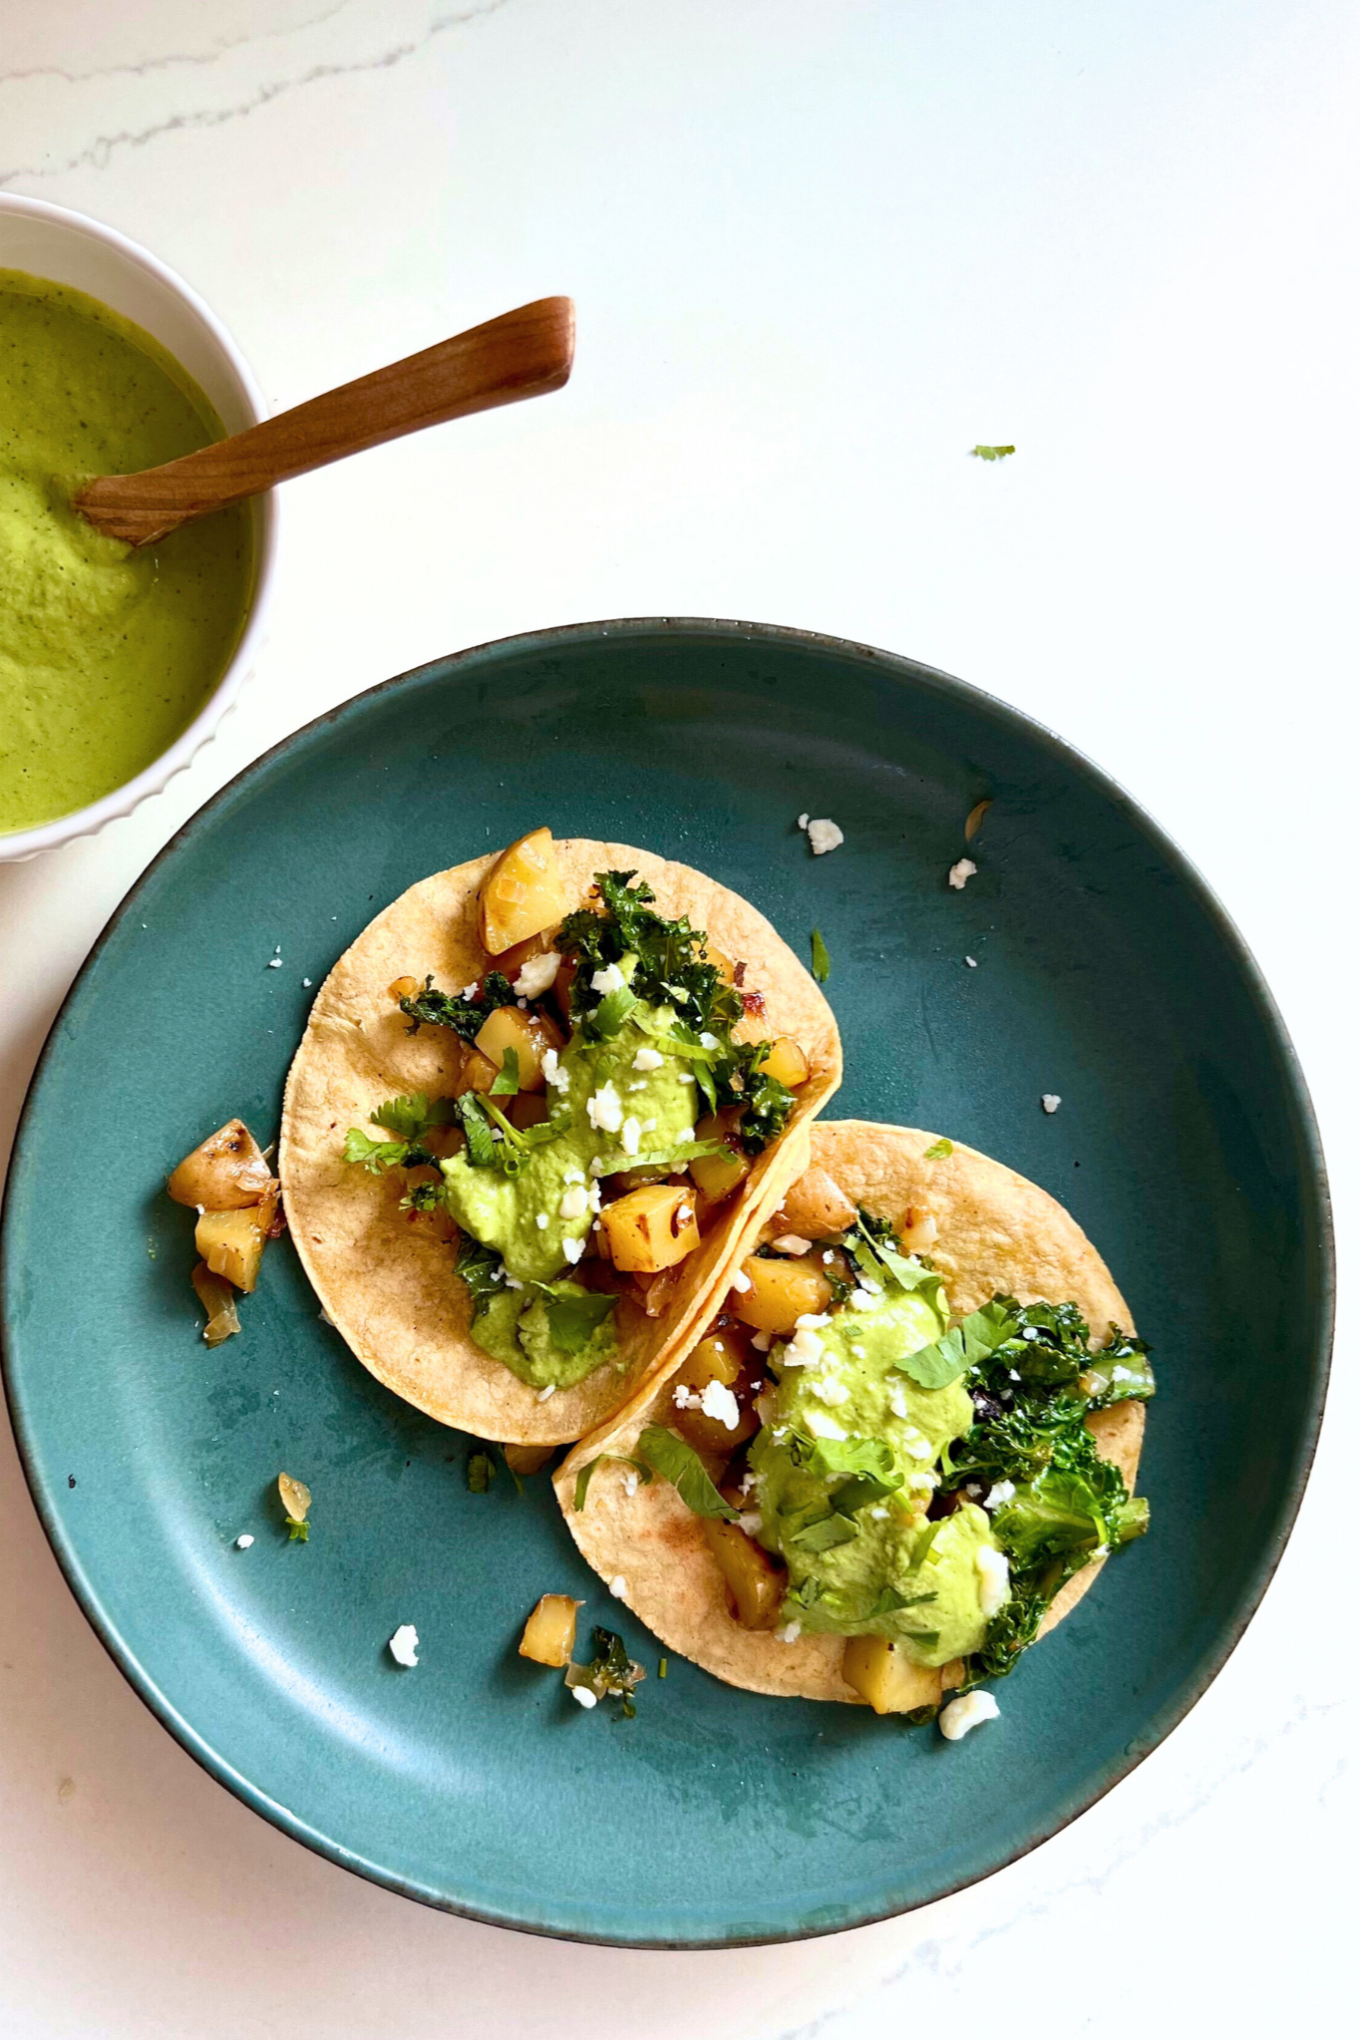 Two soft tacos filled with sautéed vegetables, kale, and crumbled cheese sit on a blue-green plate. Nearby, a bowl of cilantro Bitchin Sauce with a wooden spoon is placed on a white surface. Small bits of taco filling and cheese crumbs surround the tacos on the plate.